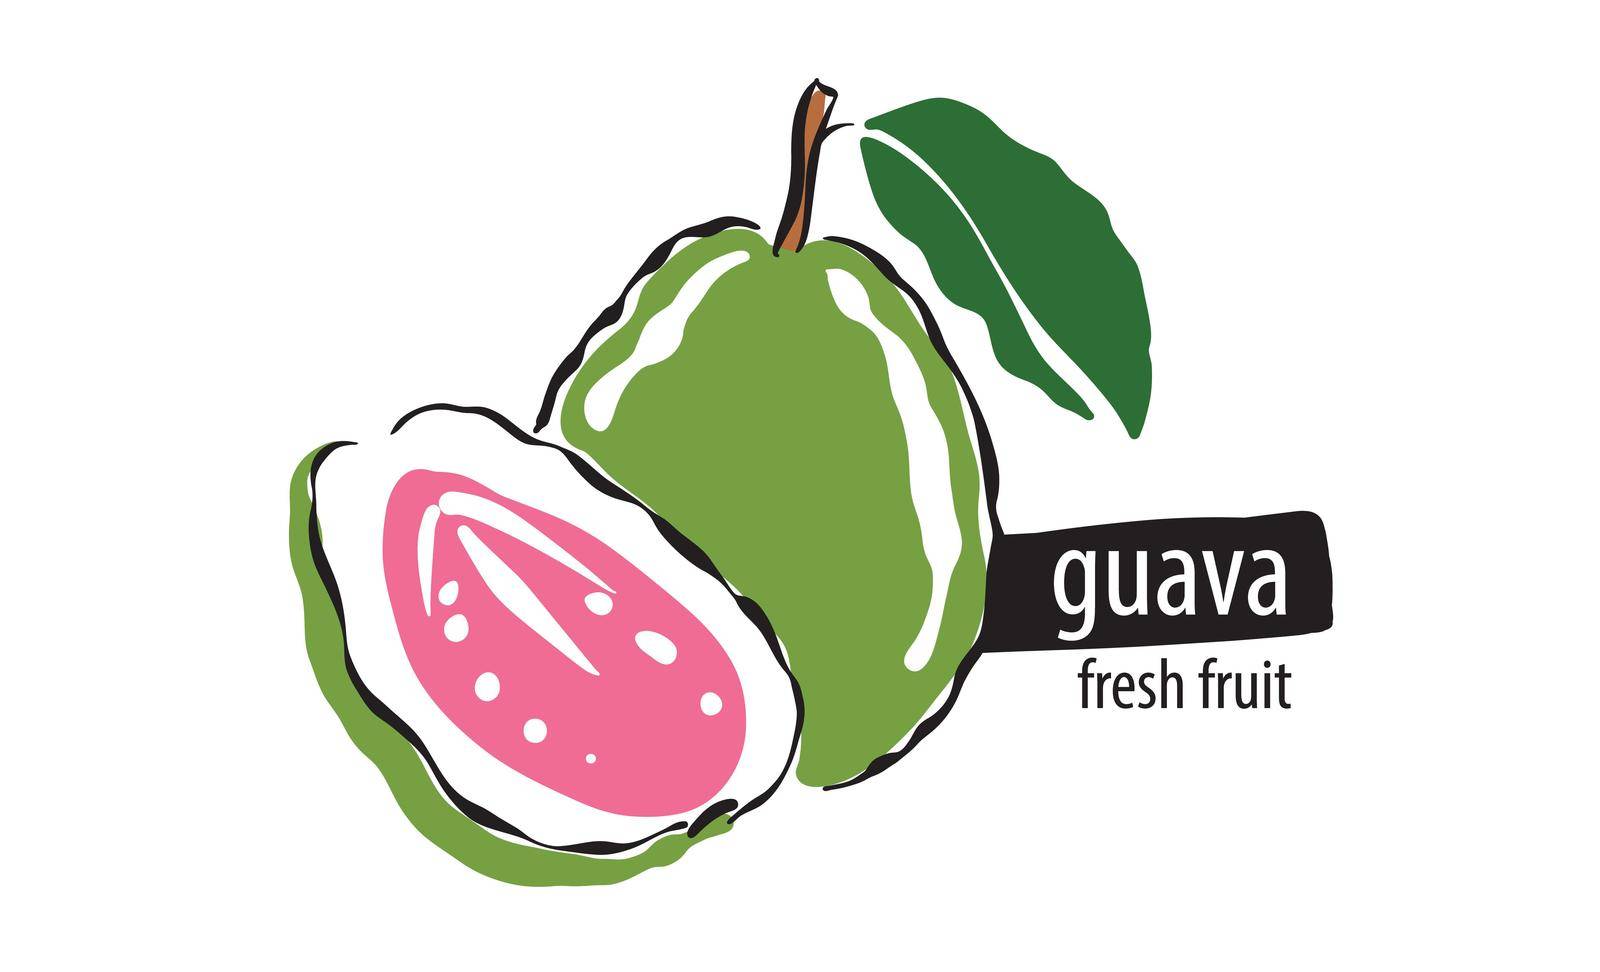 Drawn vector guava on a white background.